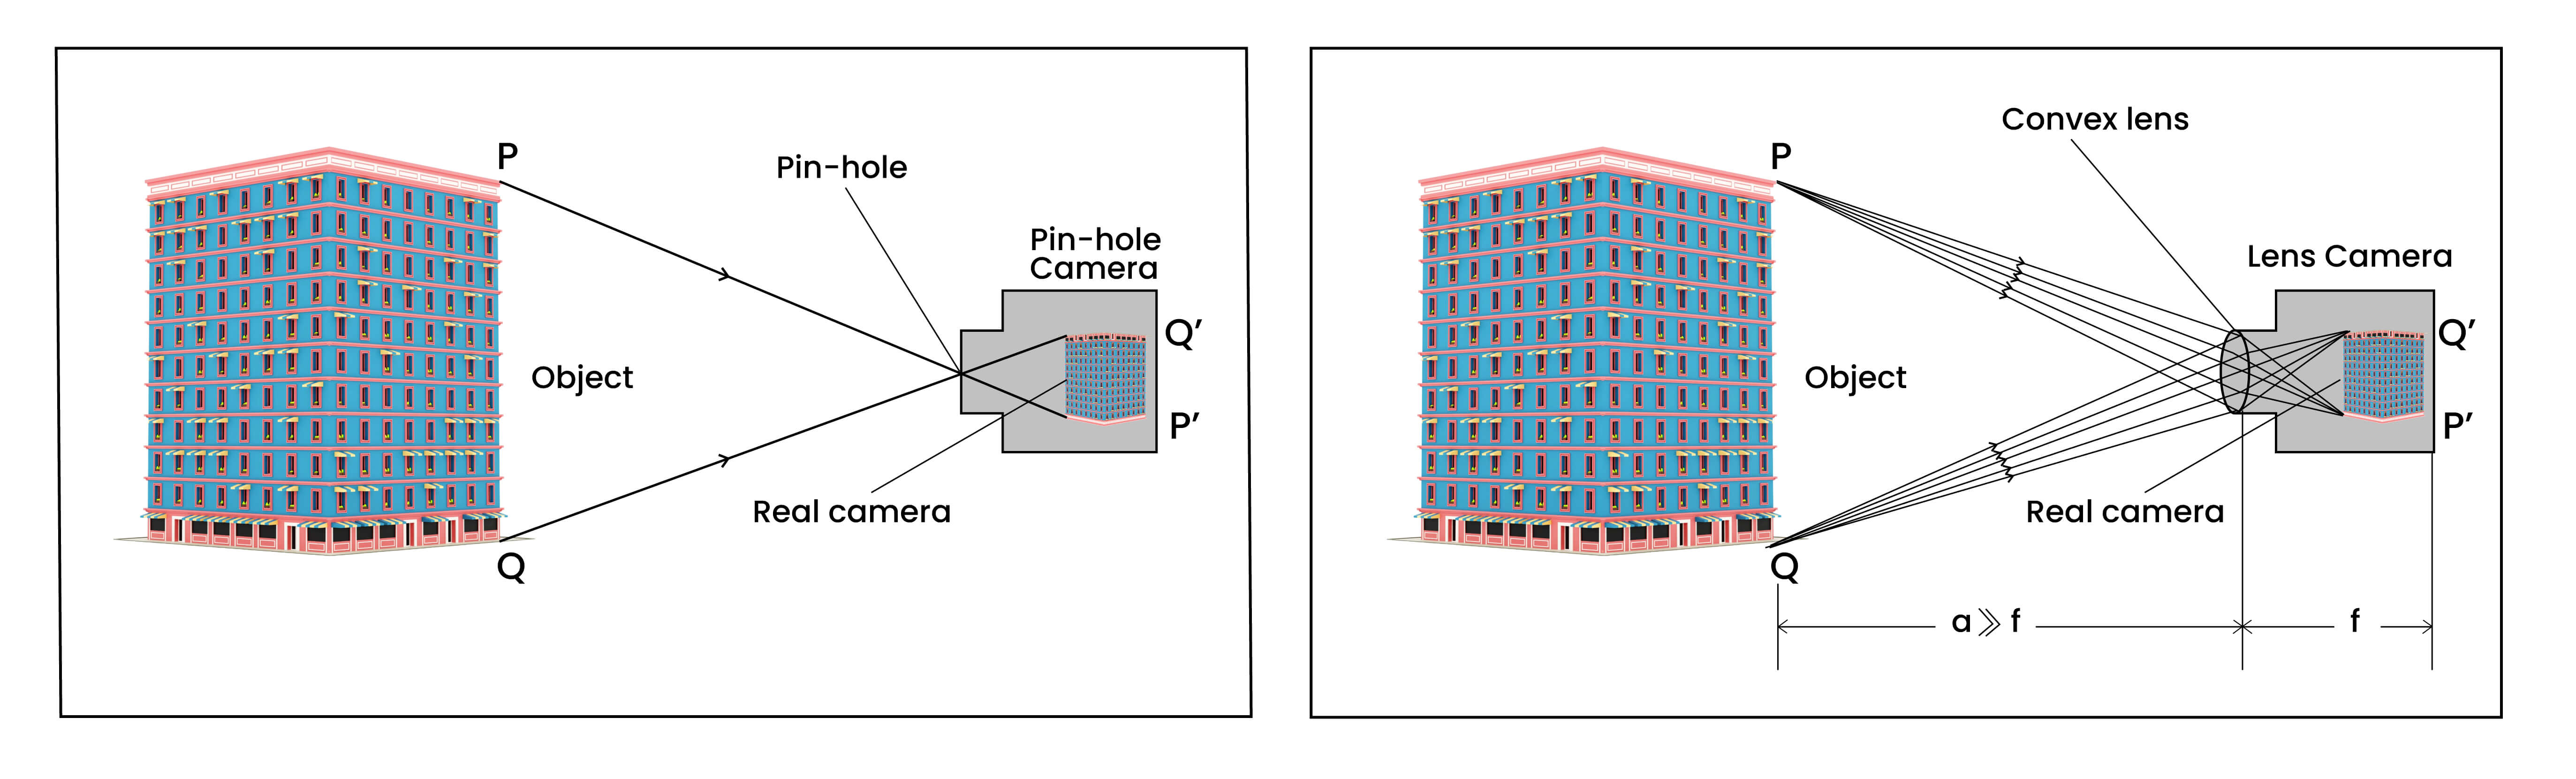 Image Formation by a Pinhole Camera and Image Formation by a Lens Camera